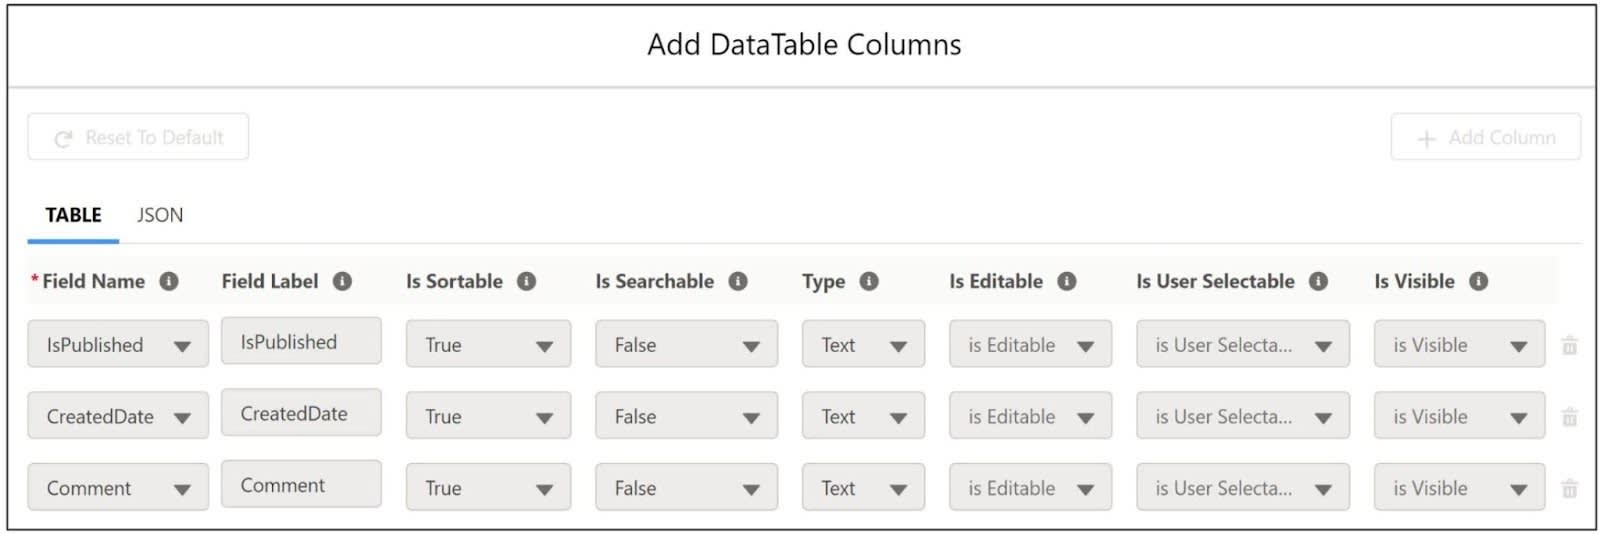 The Datatable FlexCard uses a standard Datatable element.